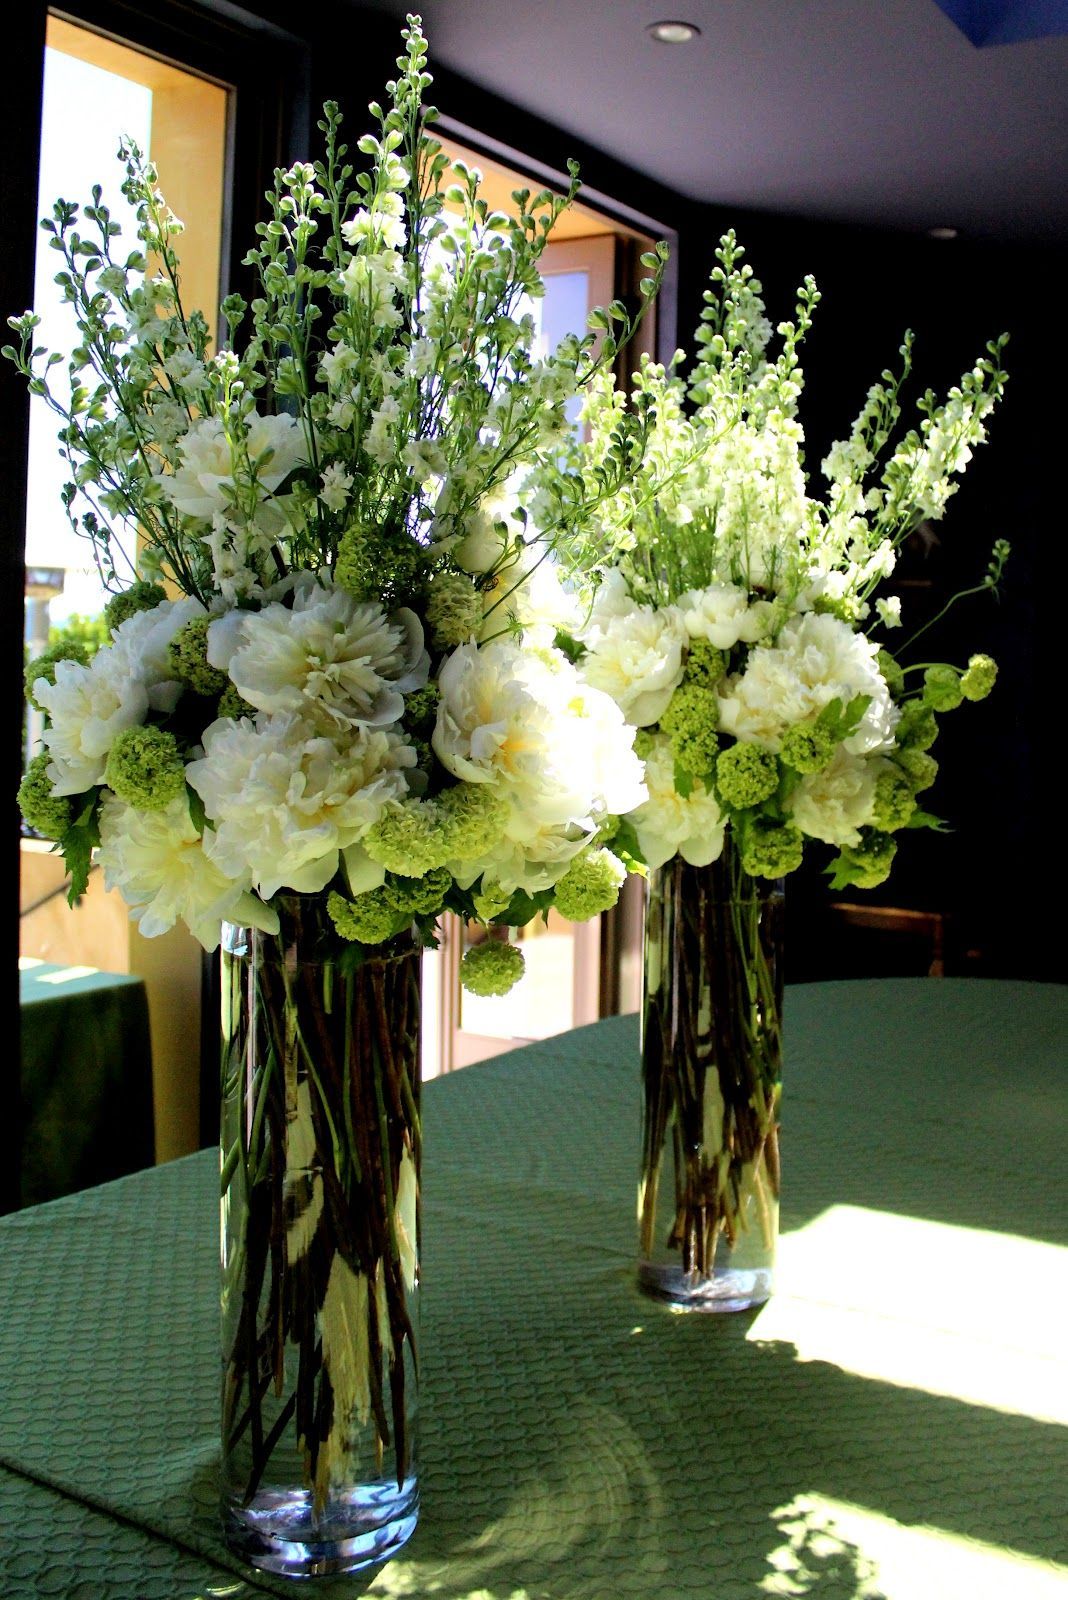 Tall Flower Arrangements For Weddings | The elegant tall centerpieces inside the home had white peonies, g